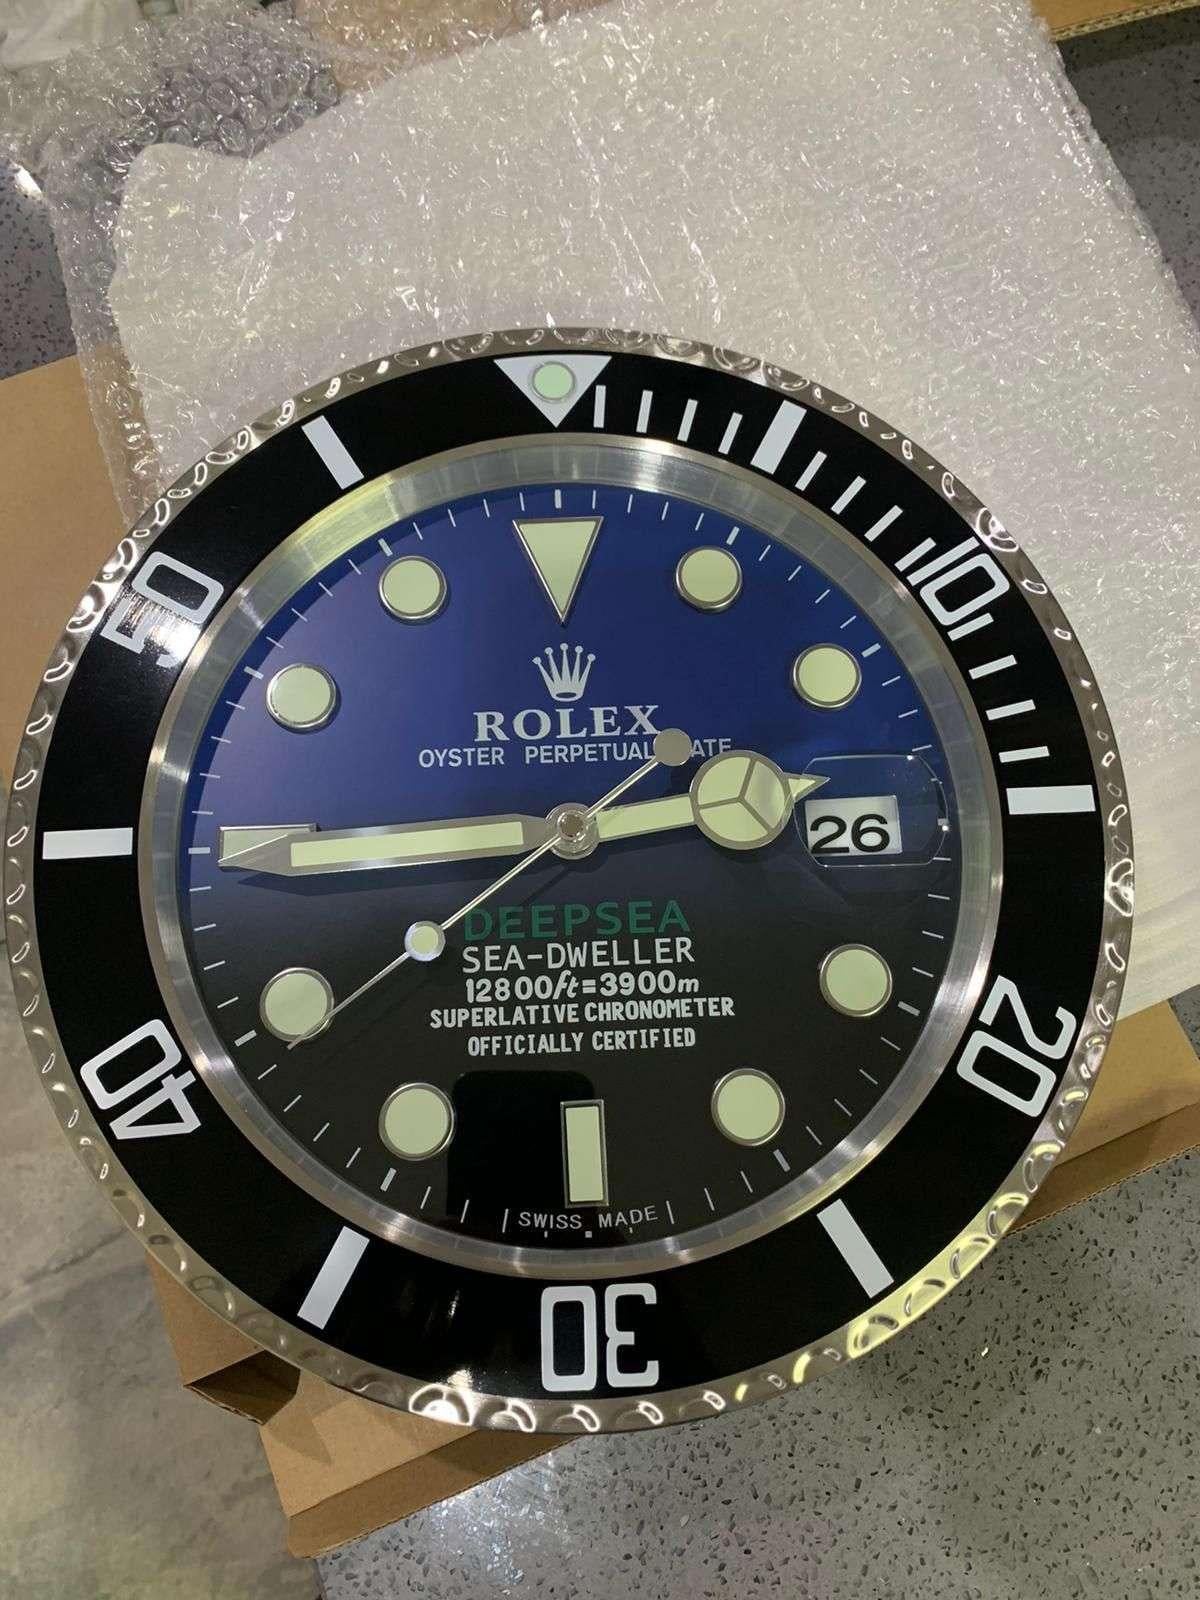 ROLEX Officially Certified Oyster Perpetual Deepsea Dweller Wall Clock  In Good Condition For Sale In Nottingham, GB